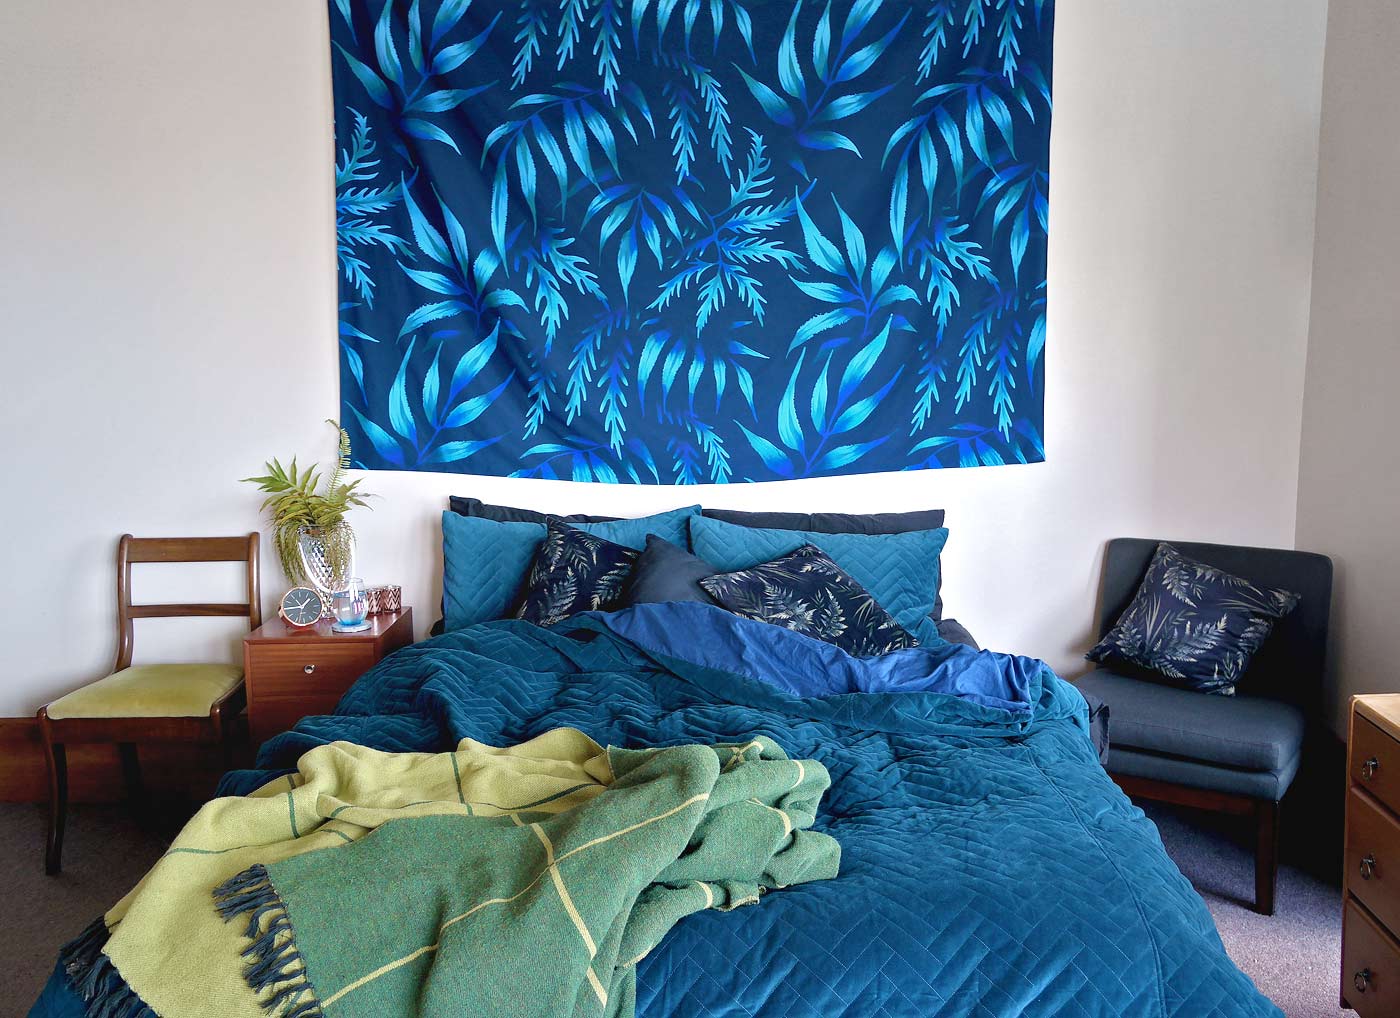 Leaf print wall hanging bedroom decor by Andrea Muller